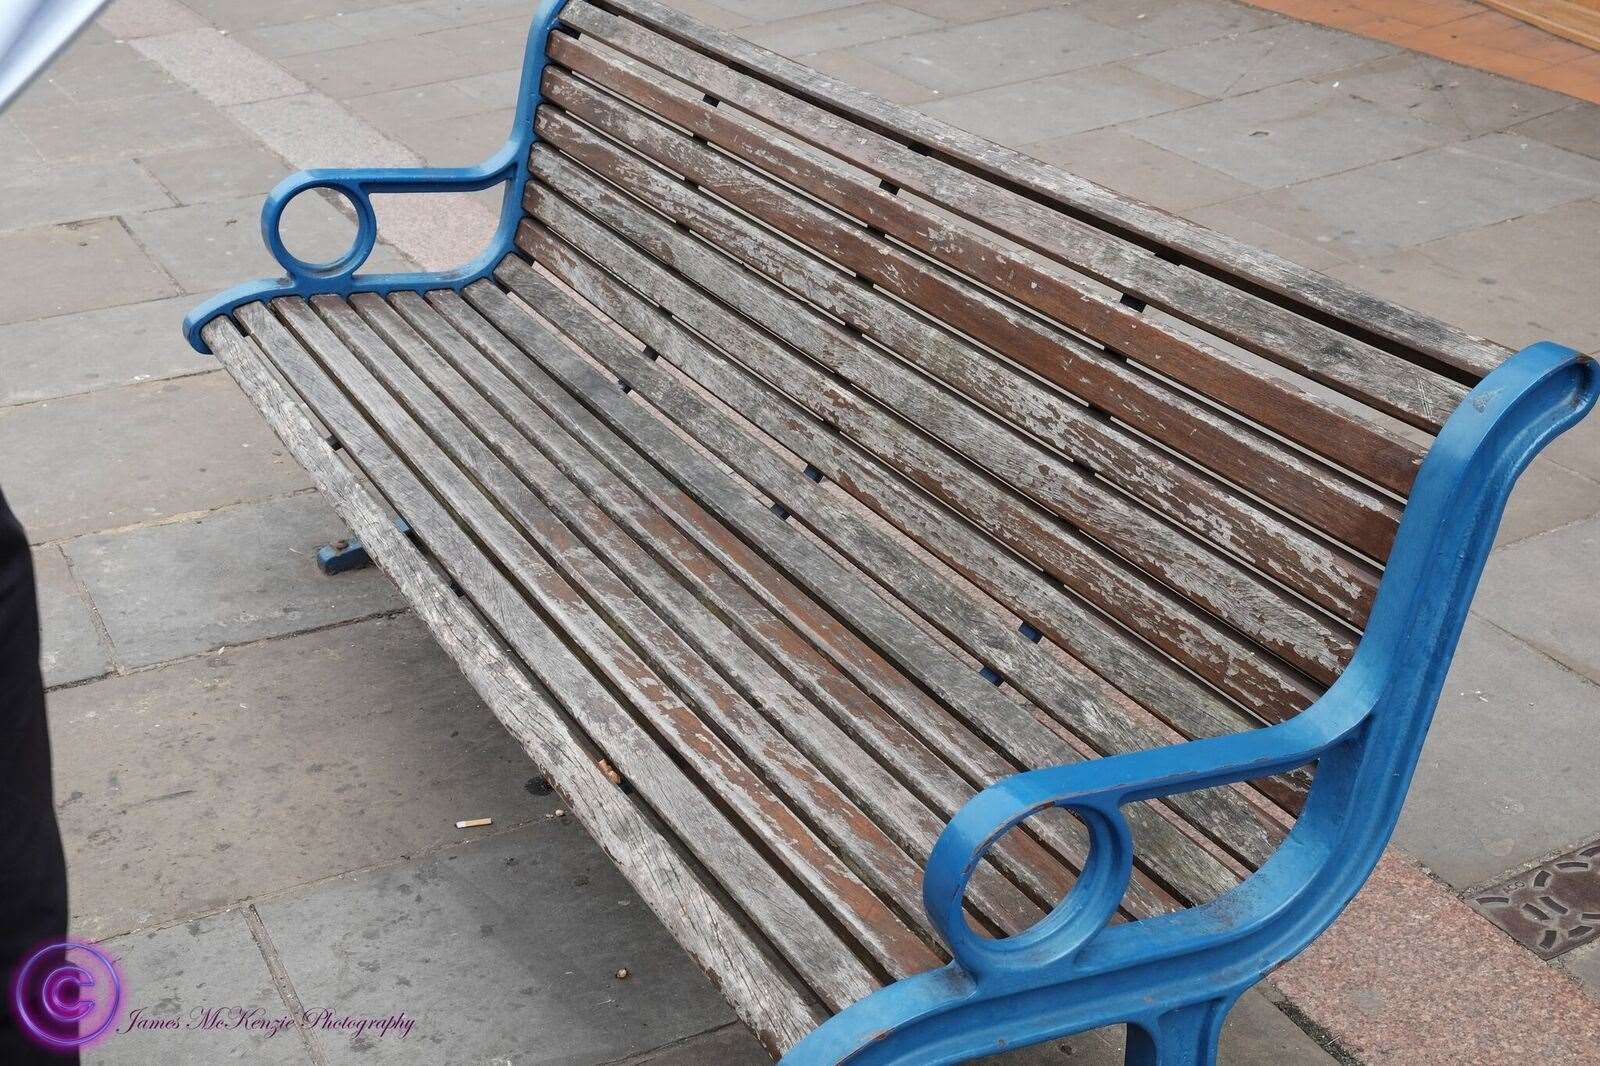 State of old bench in Sheerness. They are being taken away to be refurbished and painted